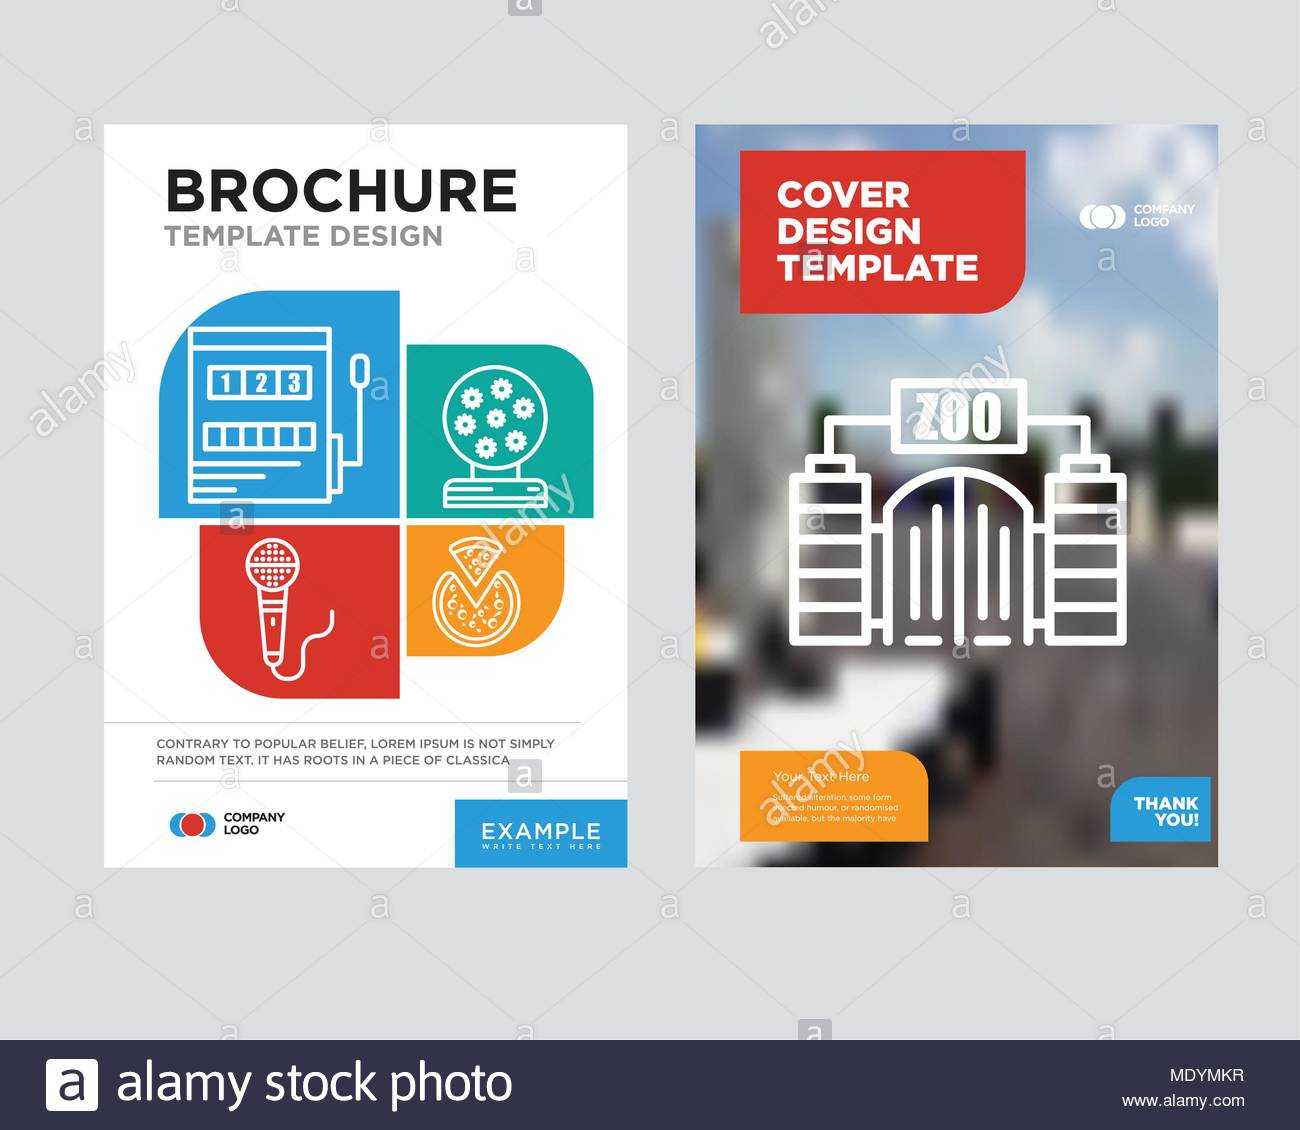 Zoo Brochure Flyer Design Template With Abstract Photo With Regard To Zoo Brochure Template